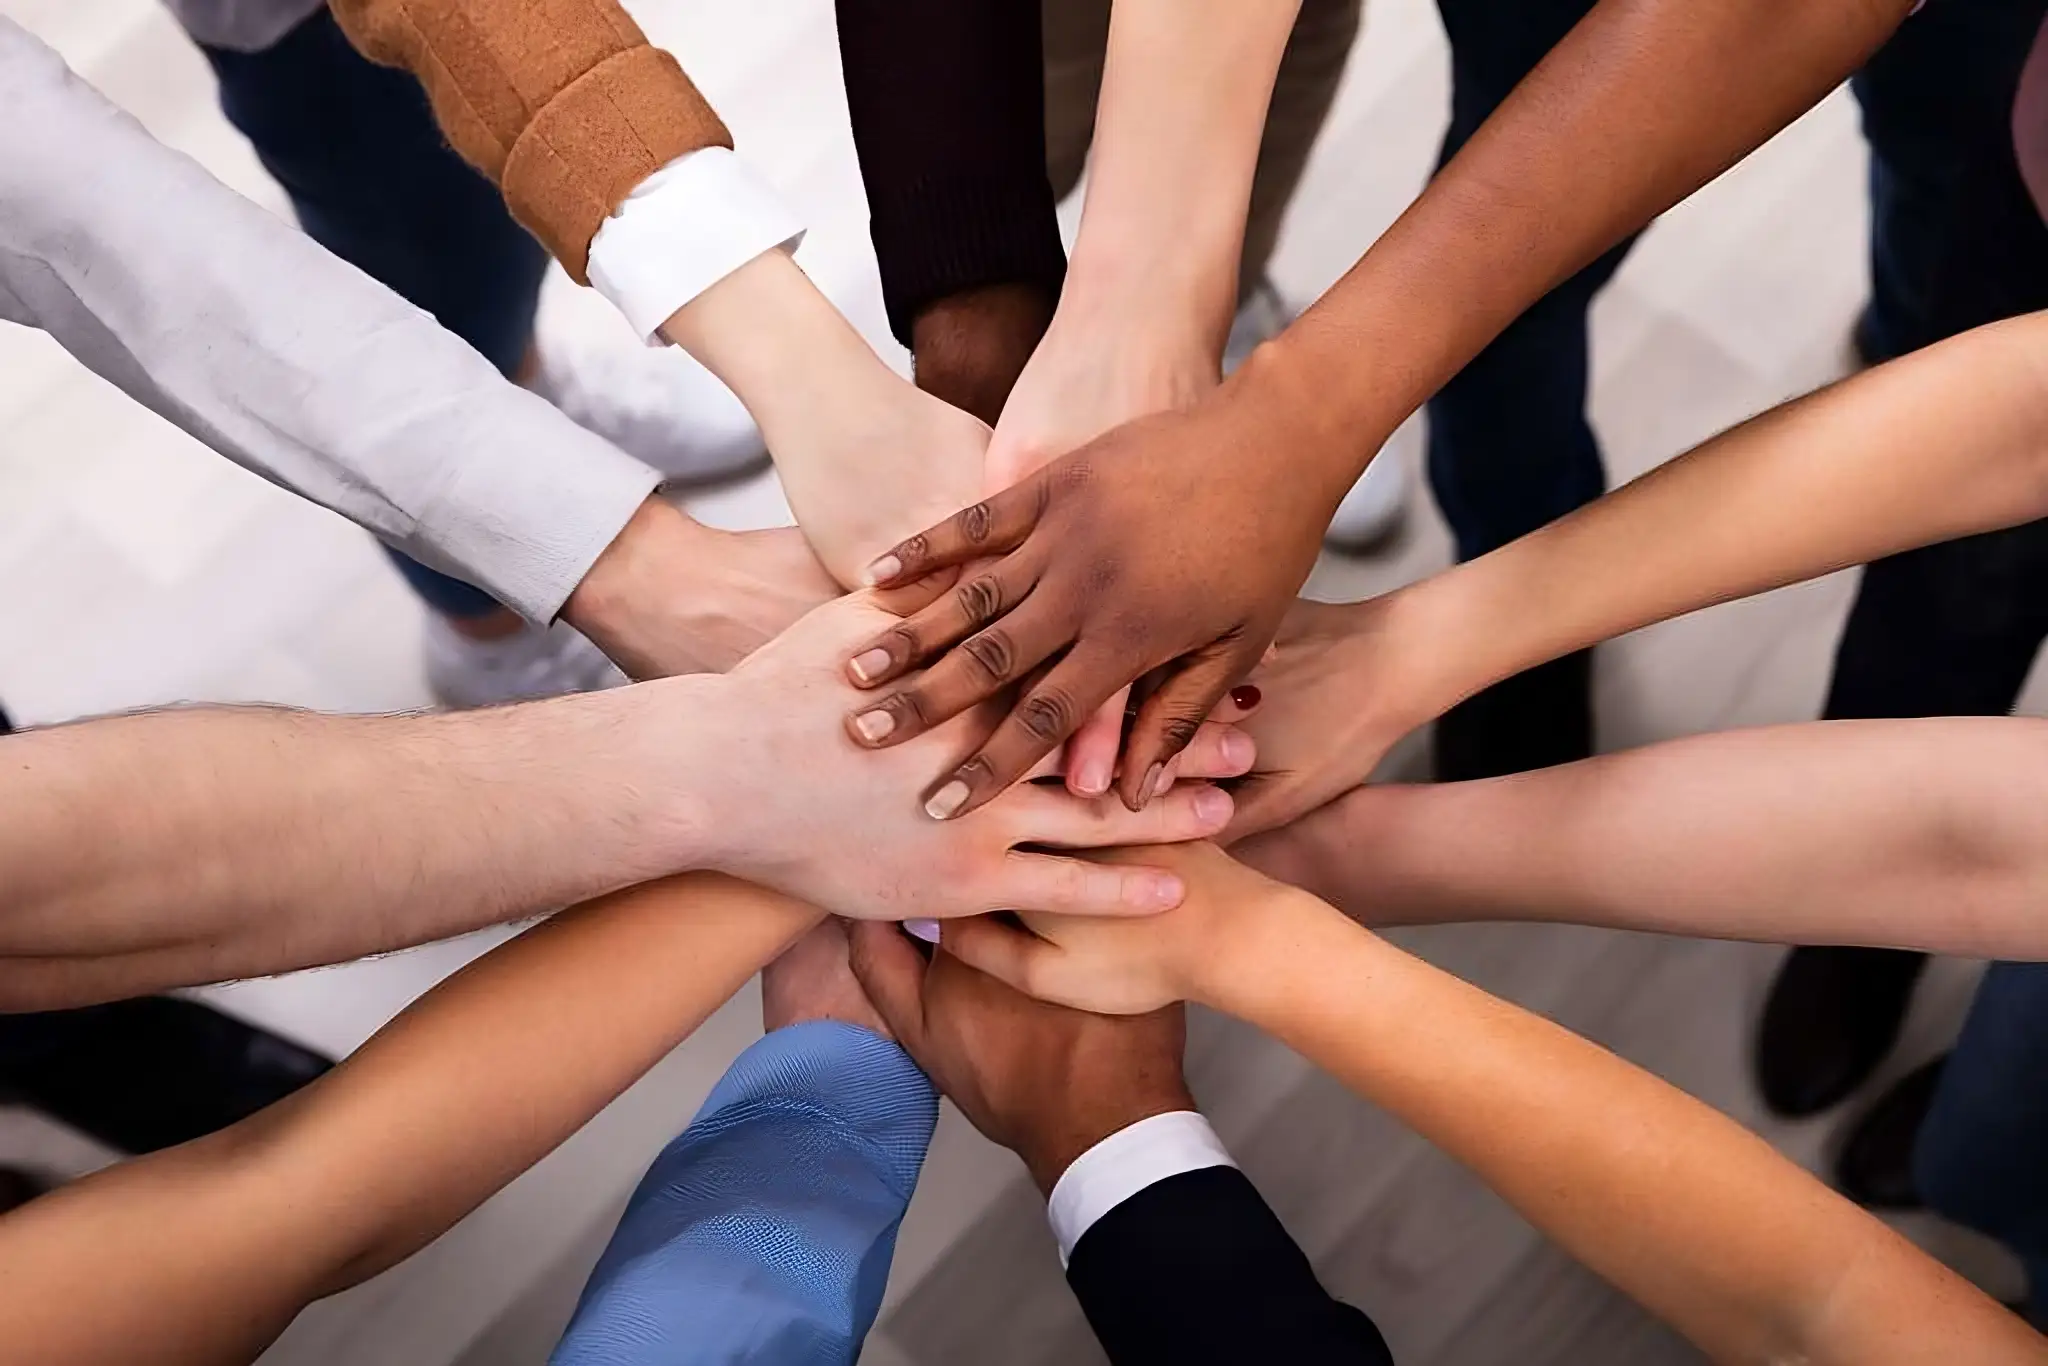 Diverse people stack their hands together